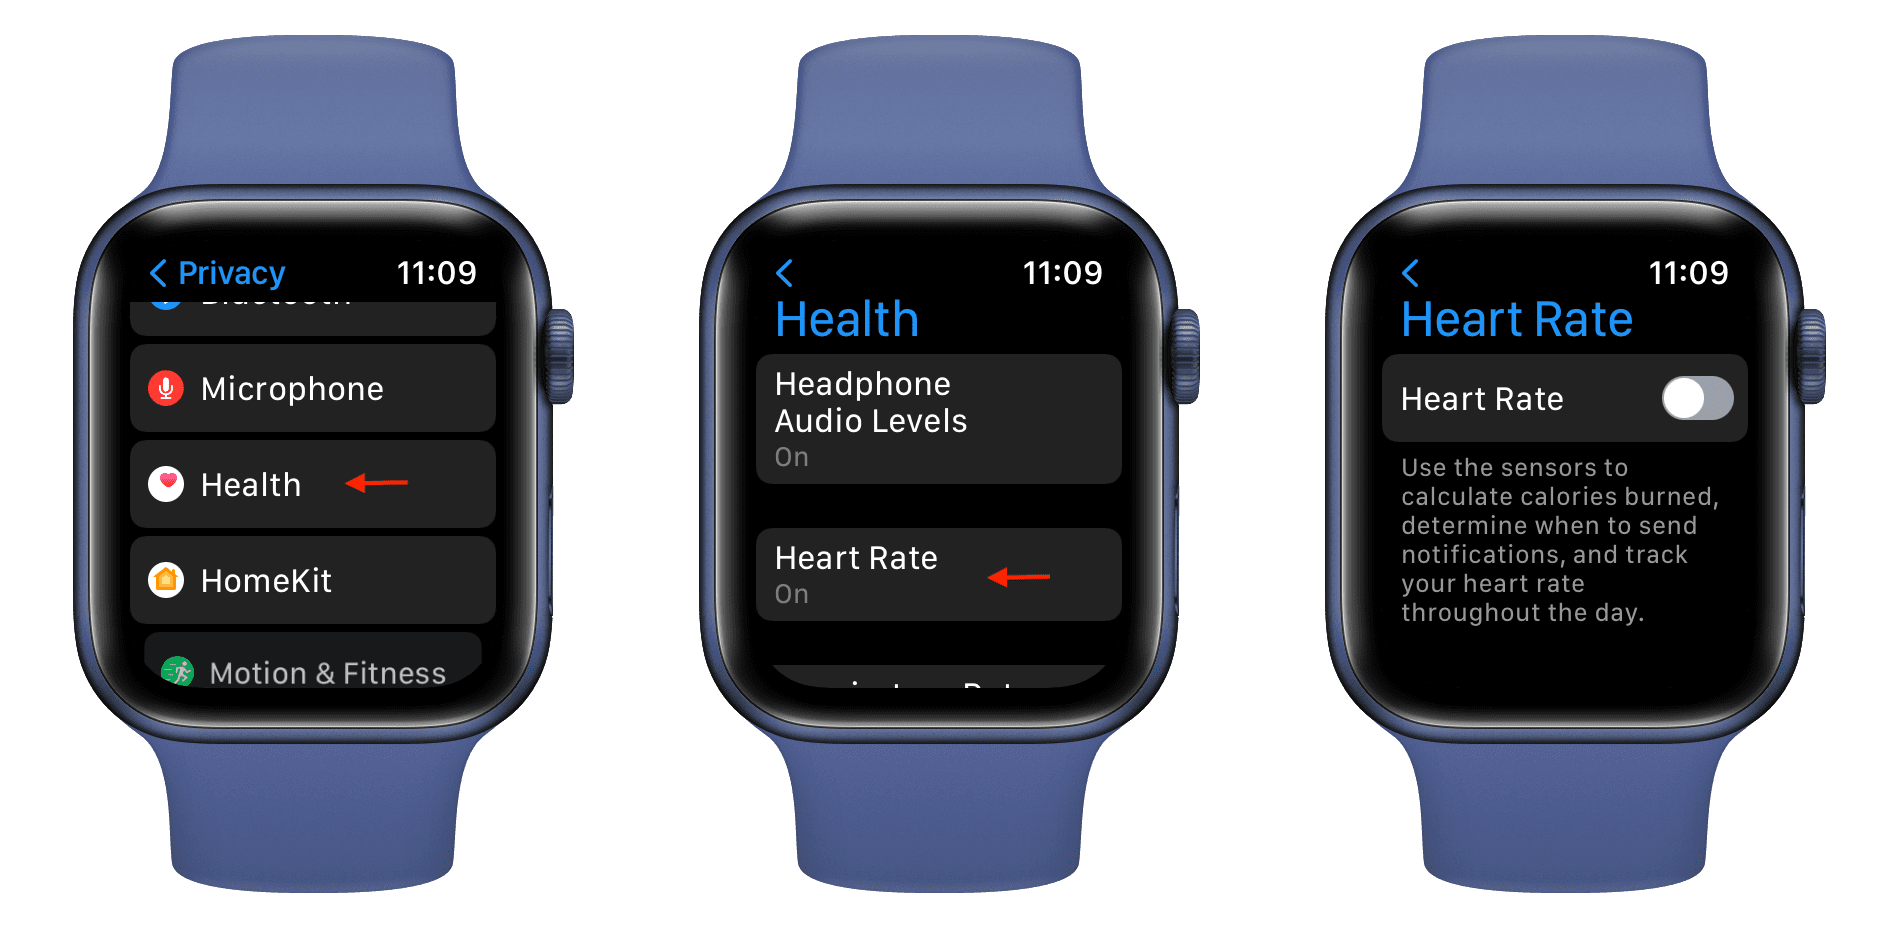 Steps to turn off heart rate and green light on Apple Watch